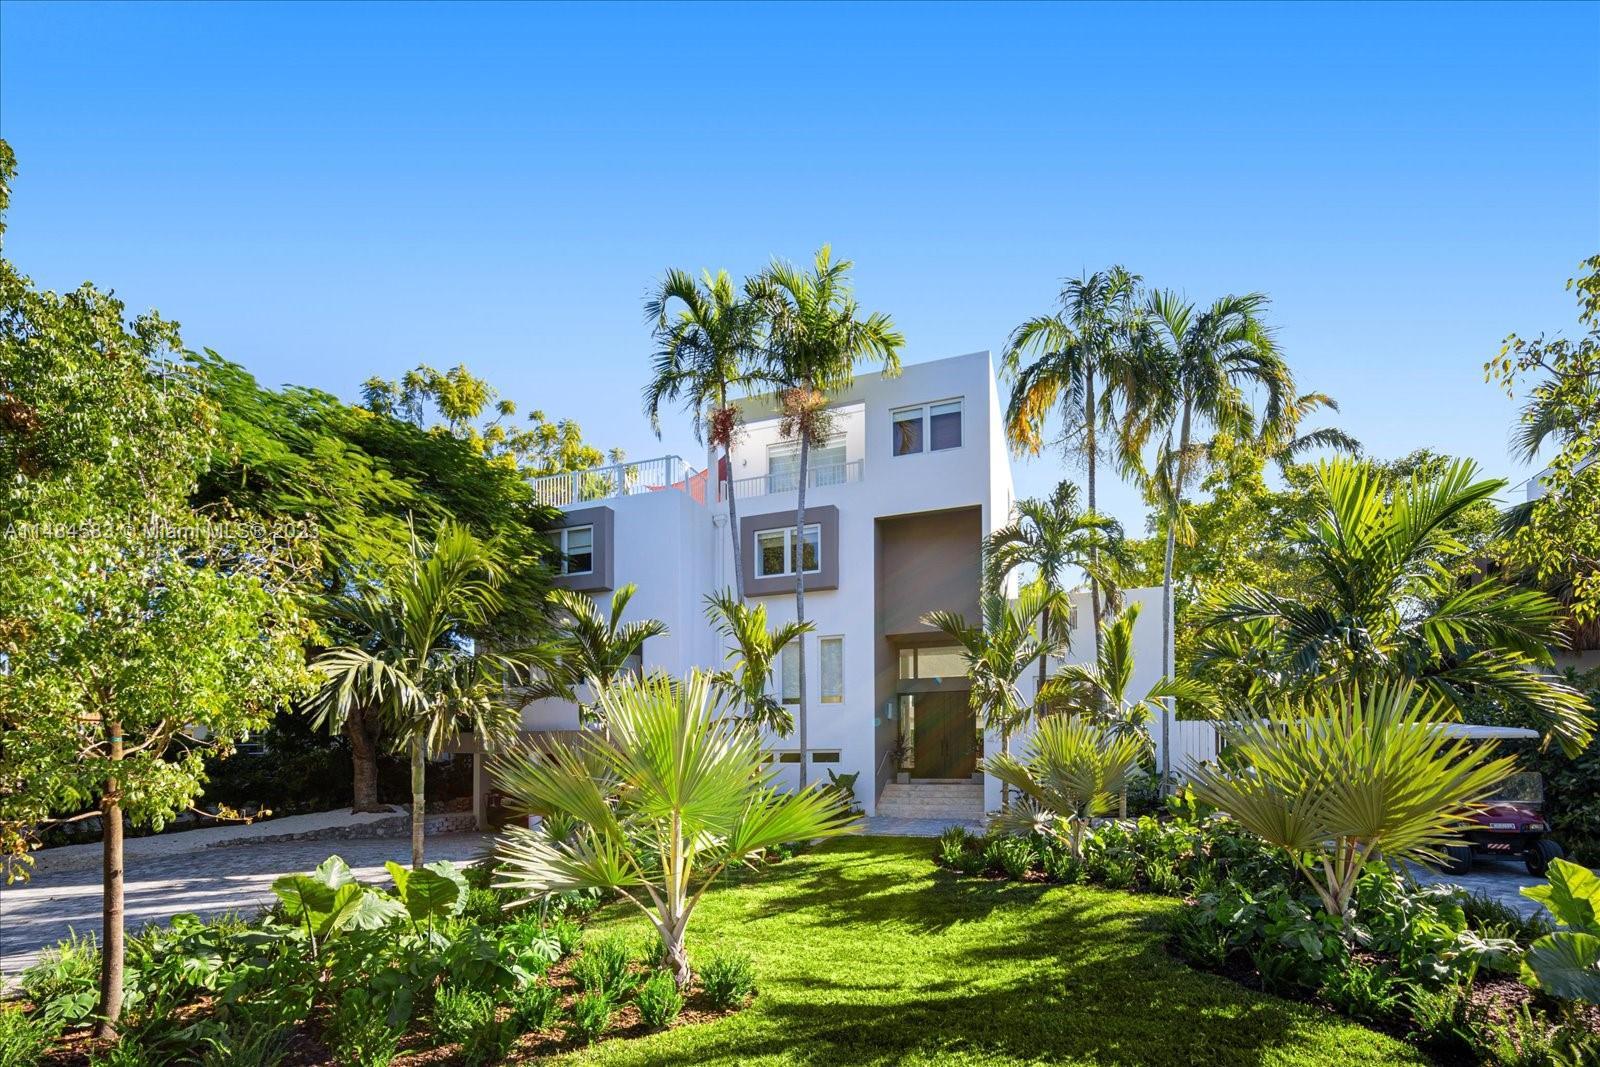 In coveted Harbor Dr this exquisitely remodeled residence exemplifies the essence of modern design, 